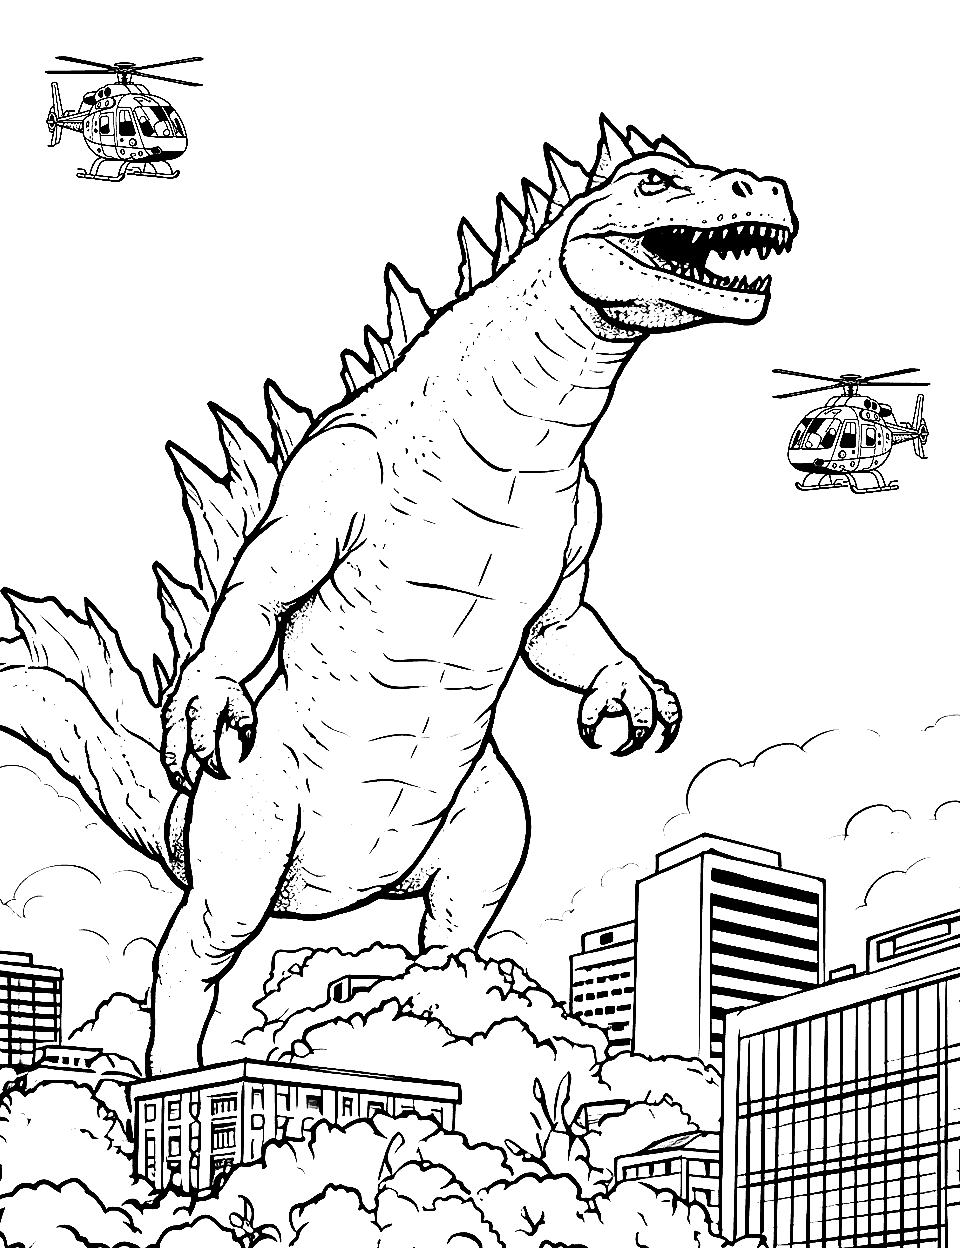 Original Godzilla's March Coloring Page - Godzilla’s iconic march, with helicopters flying above.